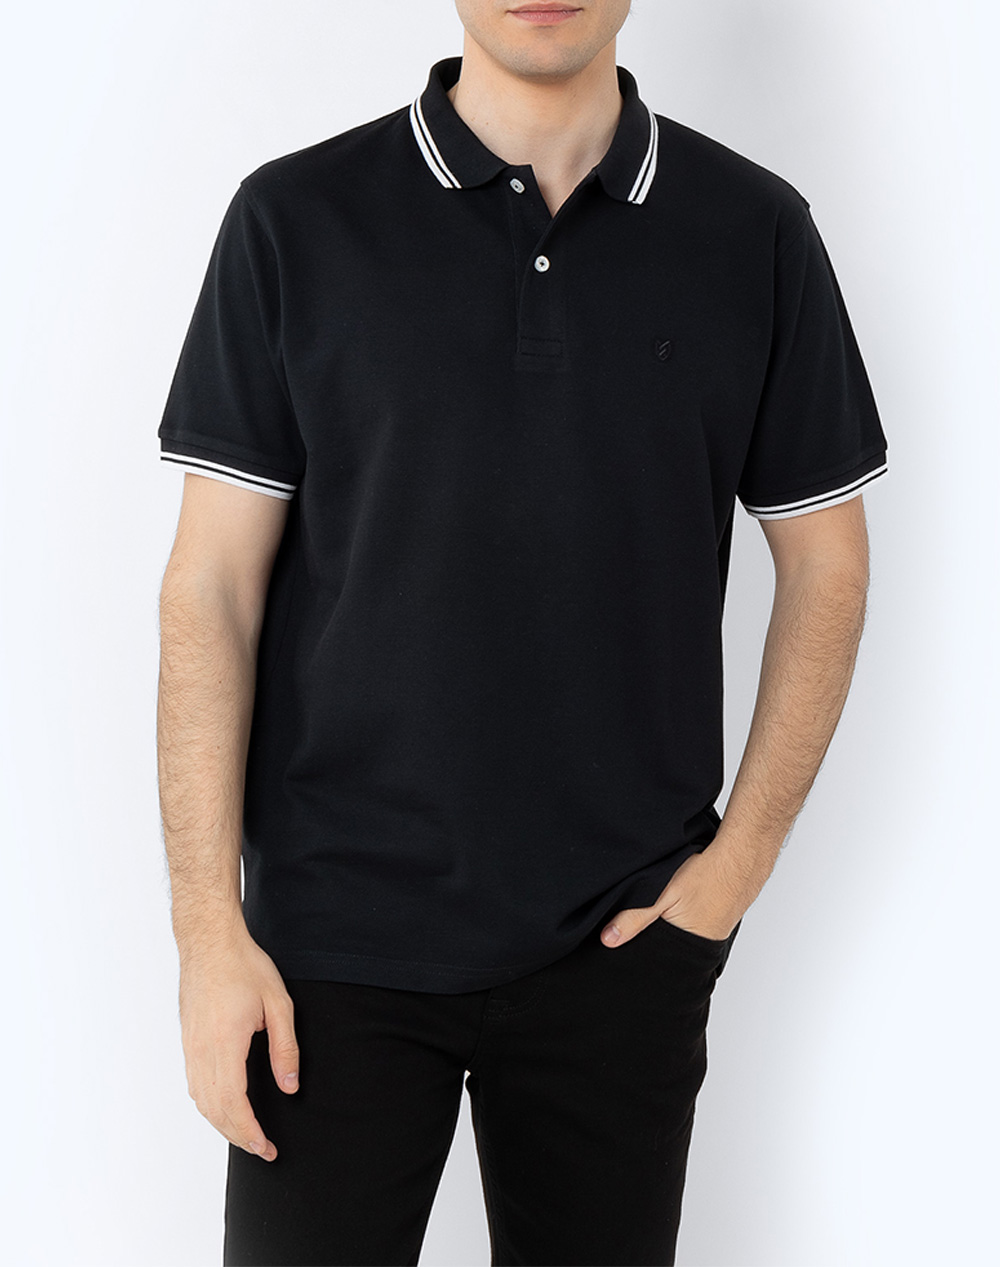 THE BOSTONIANS ΜΠΛΟΥΖΑ POLO PIQUE TWIN TIPPED REGULAR 3PS1271-BLACK Black 3820ABOST3410093_2813